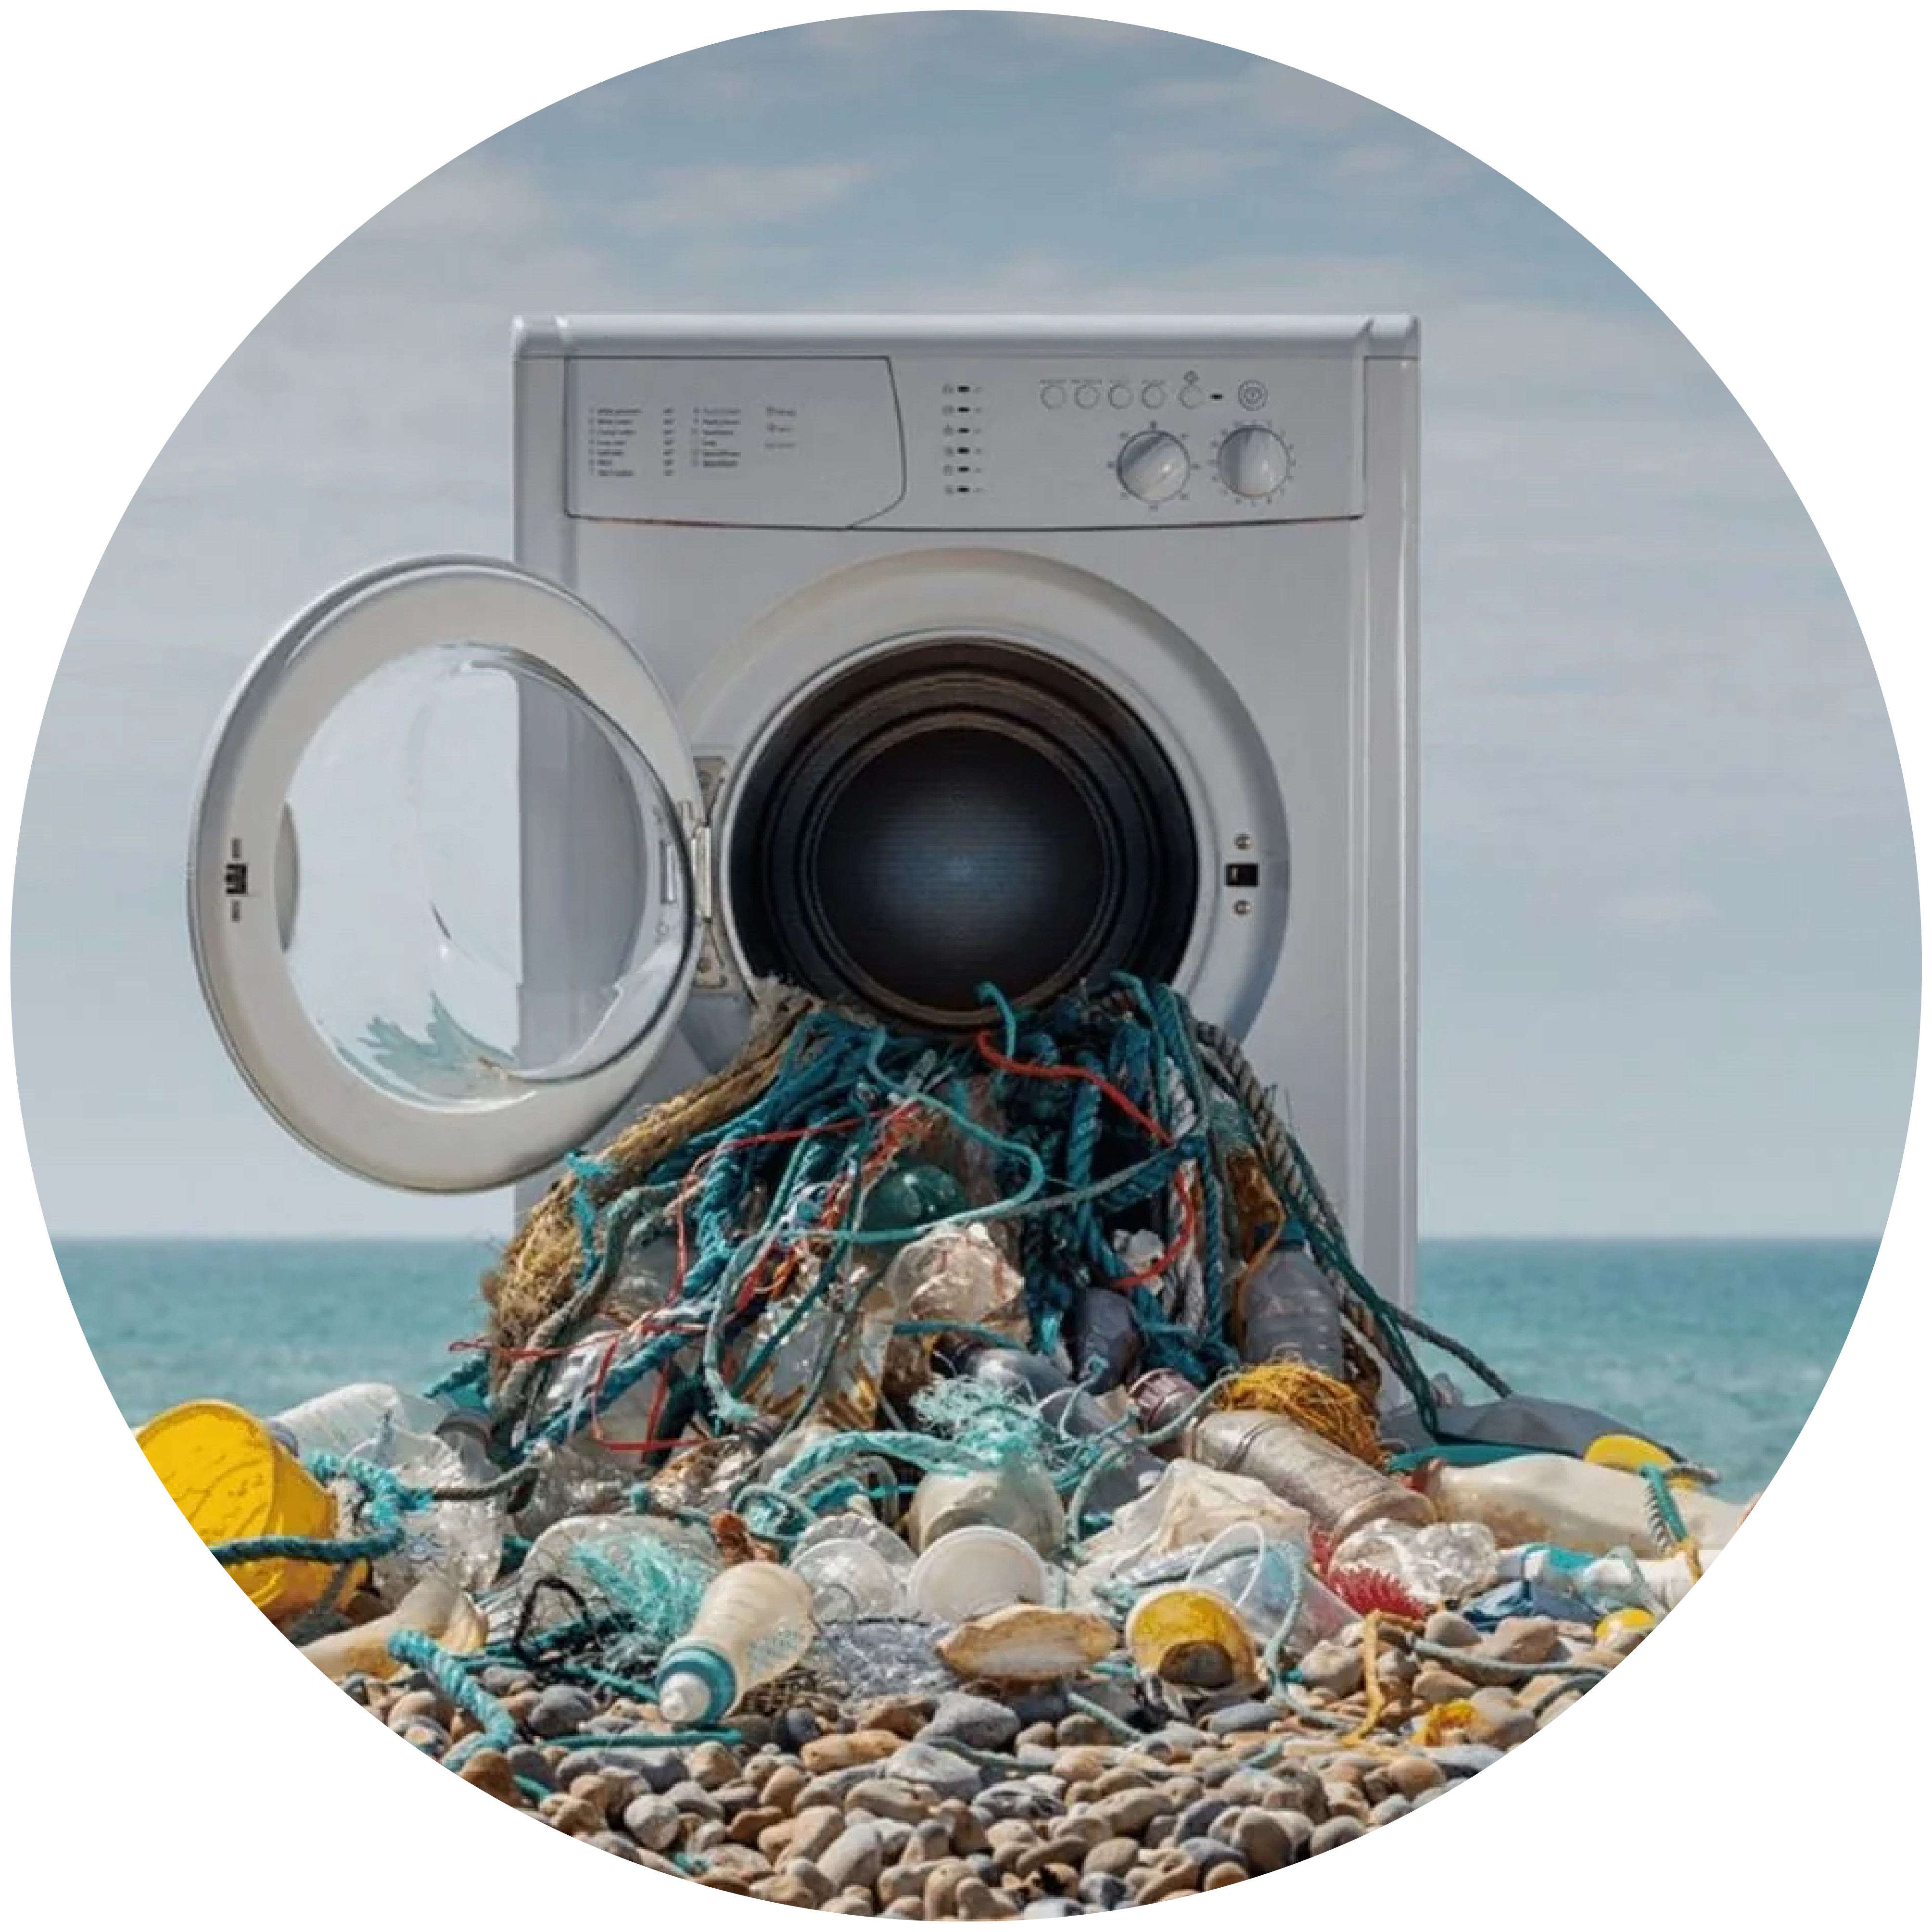 A washing machine with plastic items and bottles pouring out of the front. Photo credit PlanetCare